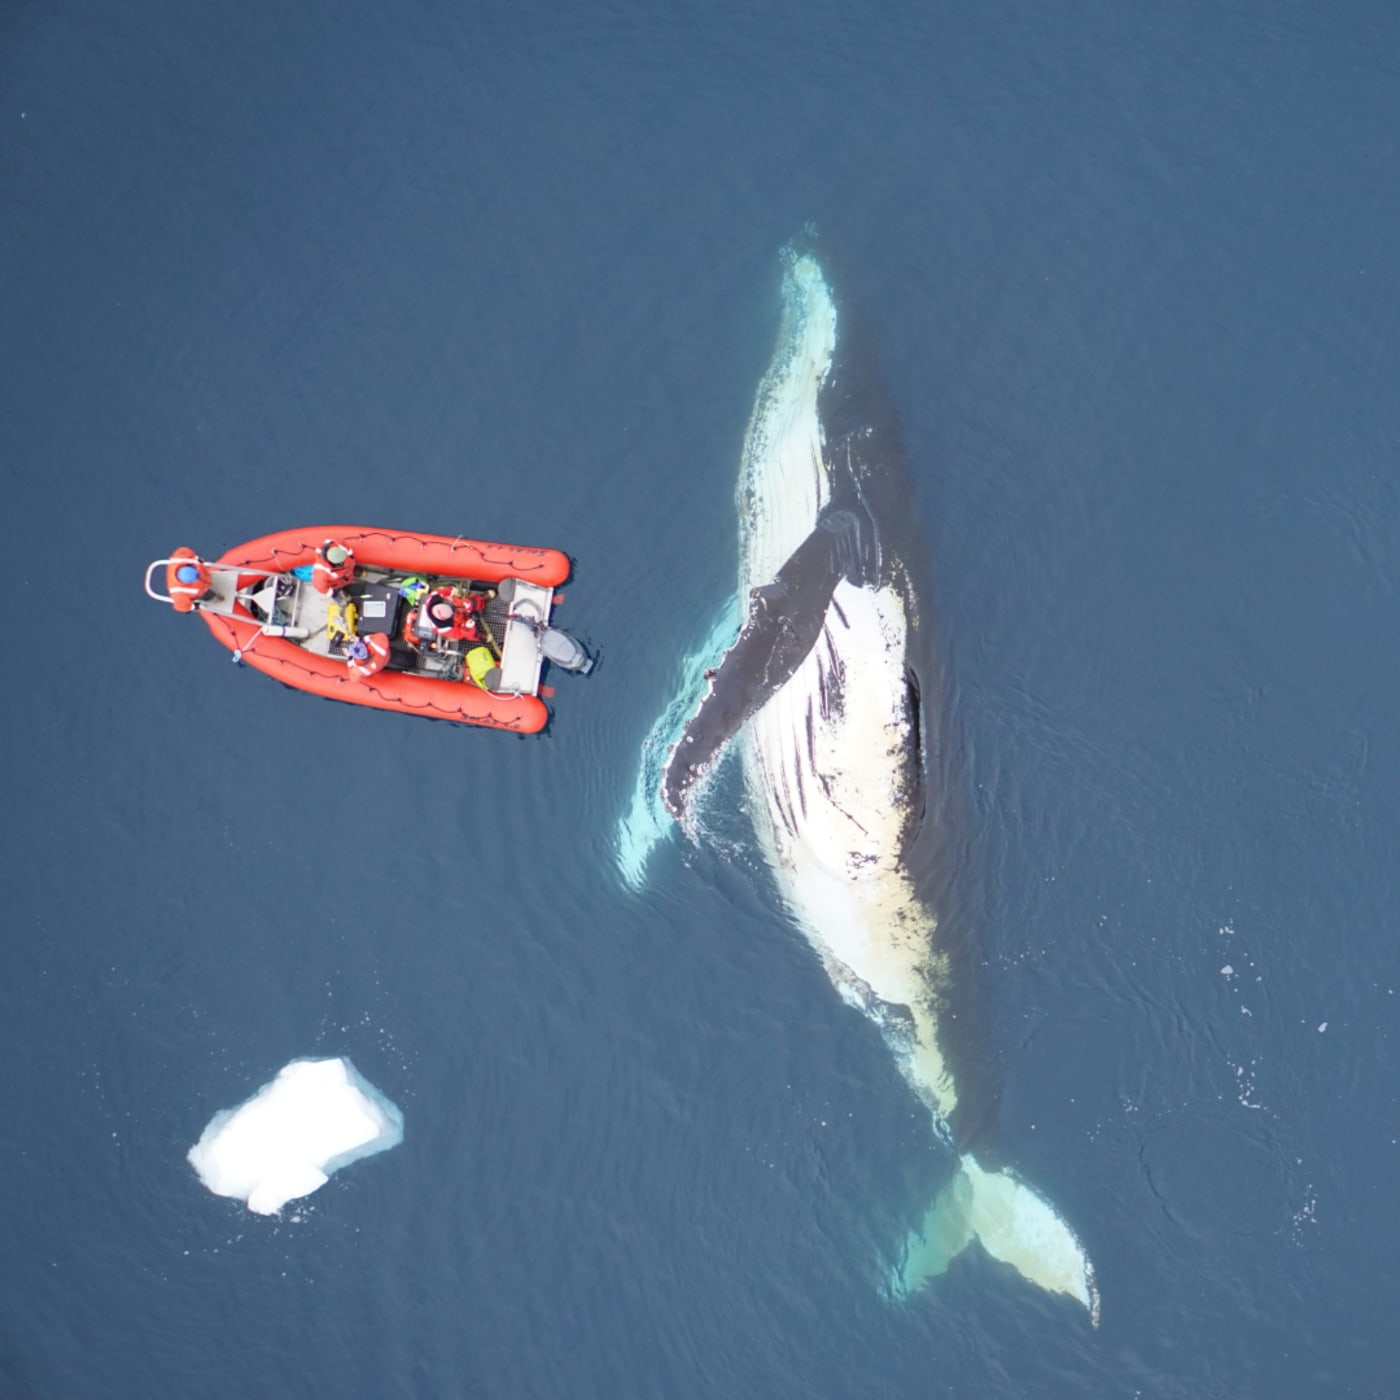 Scientists from UC Santa Cruz, Duke University and Stanford University demonstrates the scale of these ocean giants – humpback whales, Charlotte Bay, Antarctic Peninsula.